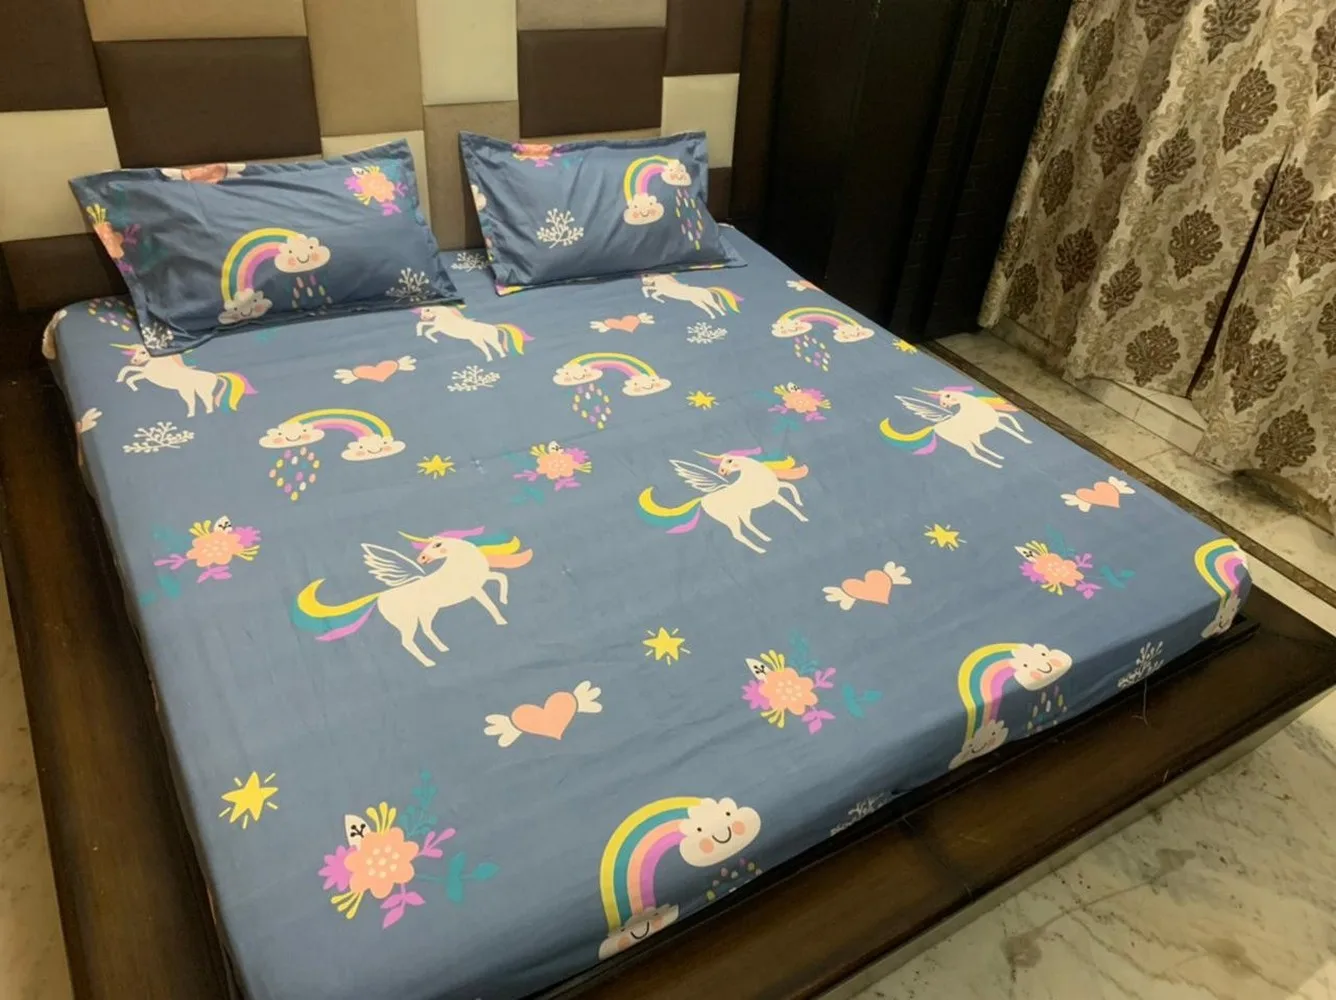 Bedsheet printed, Fitted, Elastic Corner, 90x100, Glace Cotton, 2 Pillow Covers, grey unicorn design